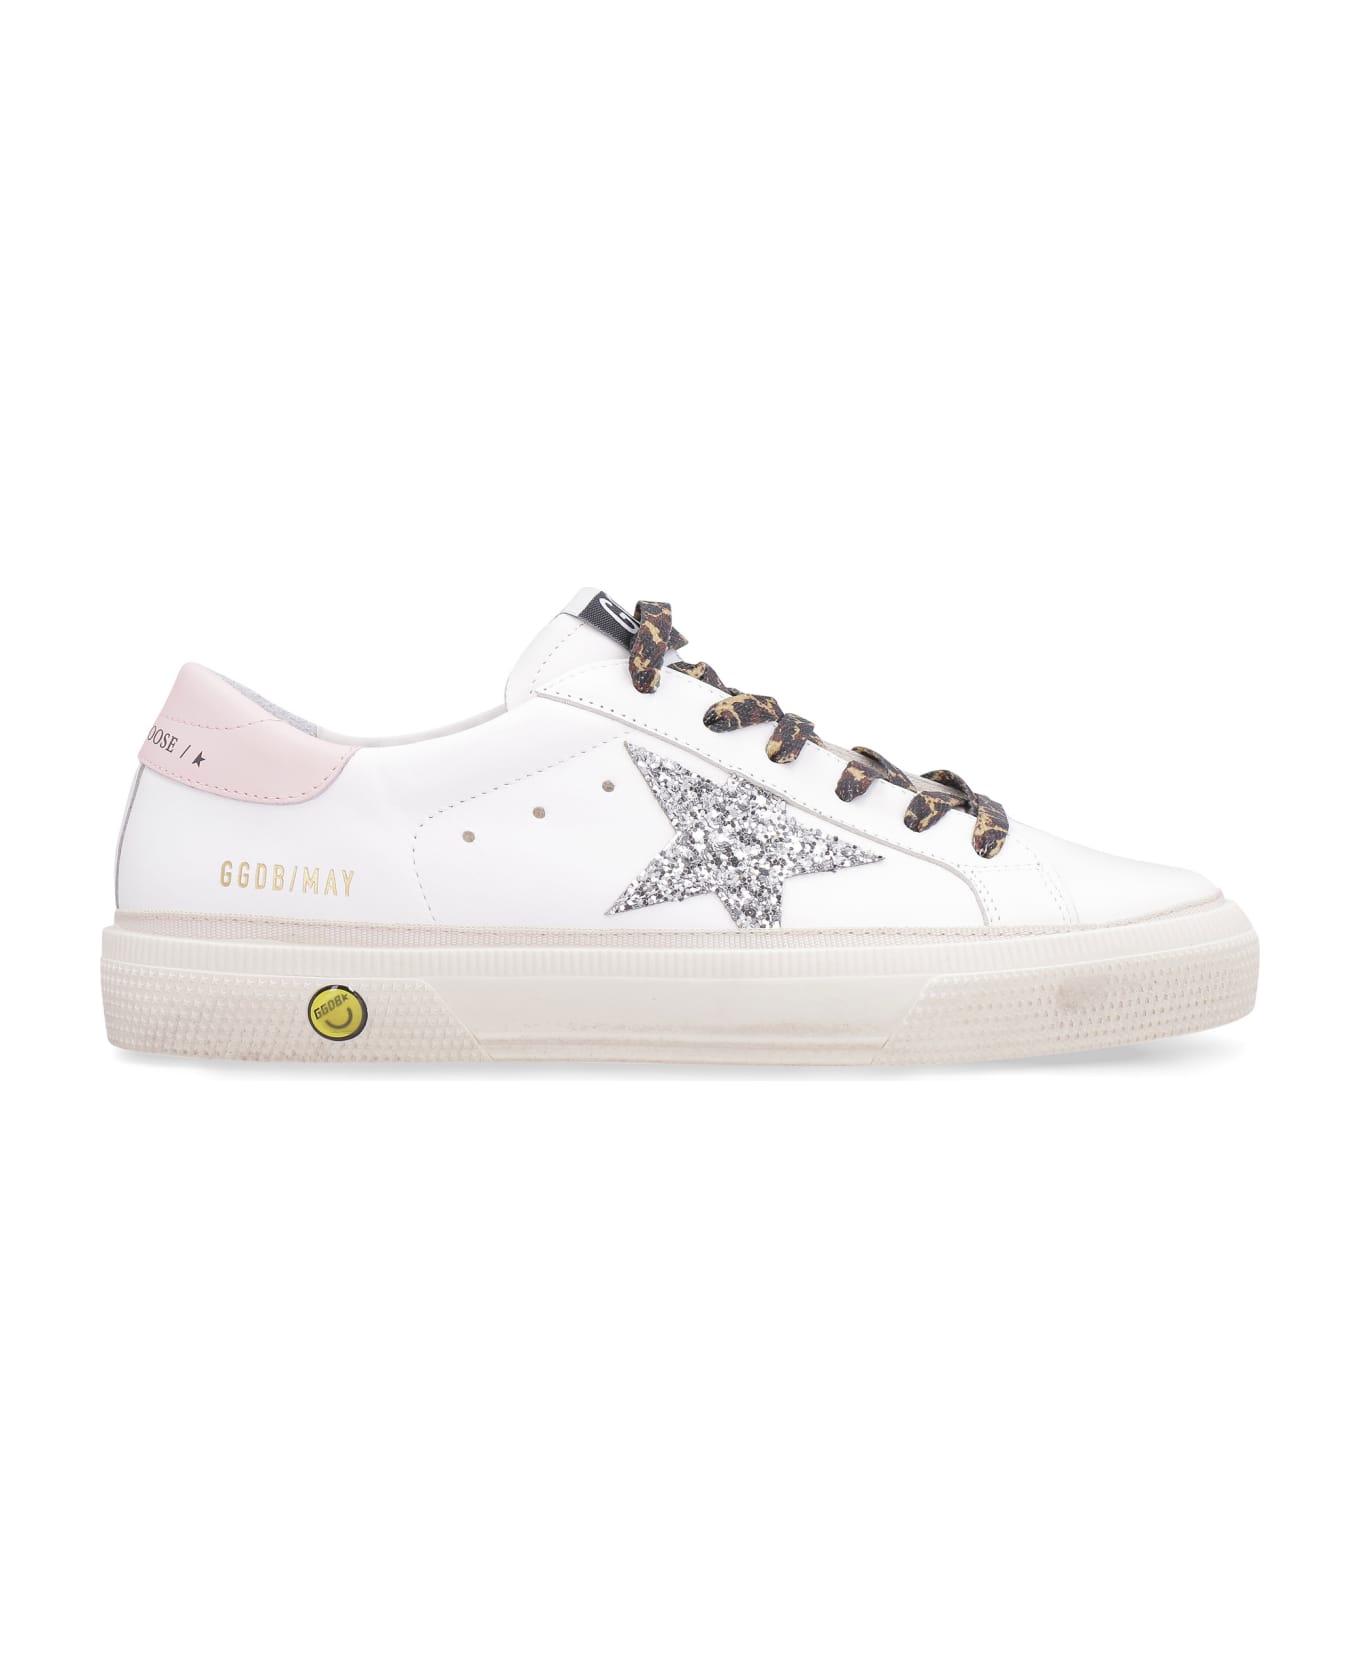 Golden Goose Superstar Leather Low-top Sneakers - White